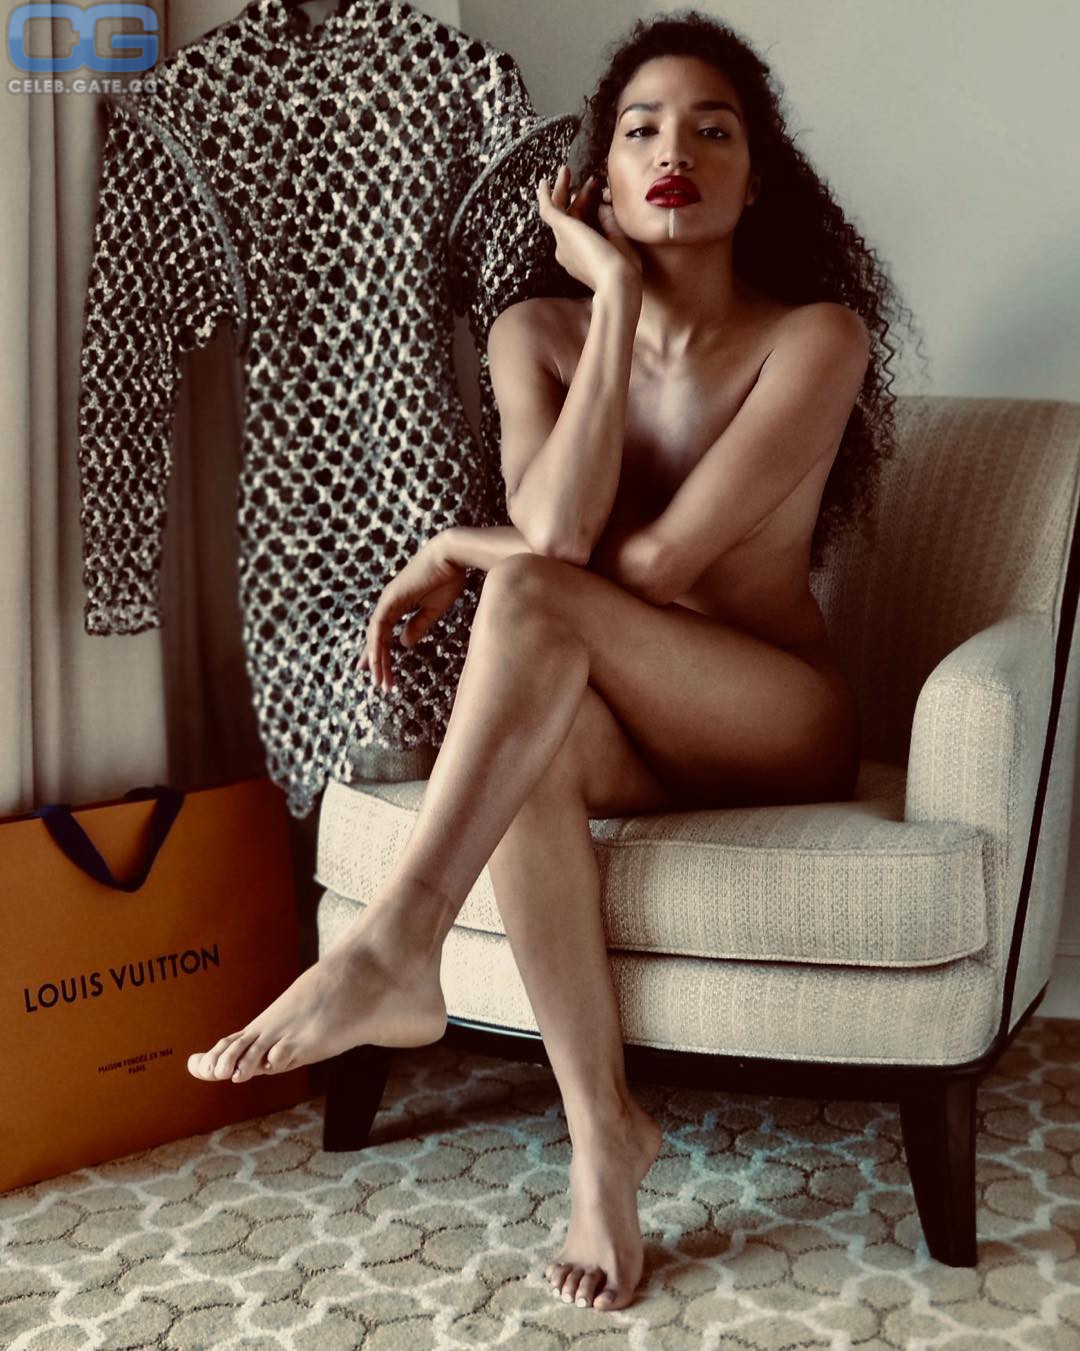 Indya Moore nude, pictures, photos, Playboy, naked, topless, fappening